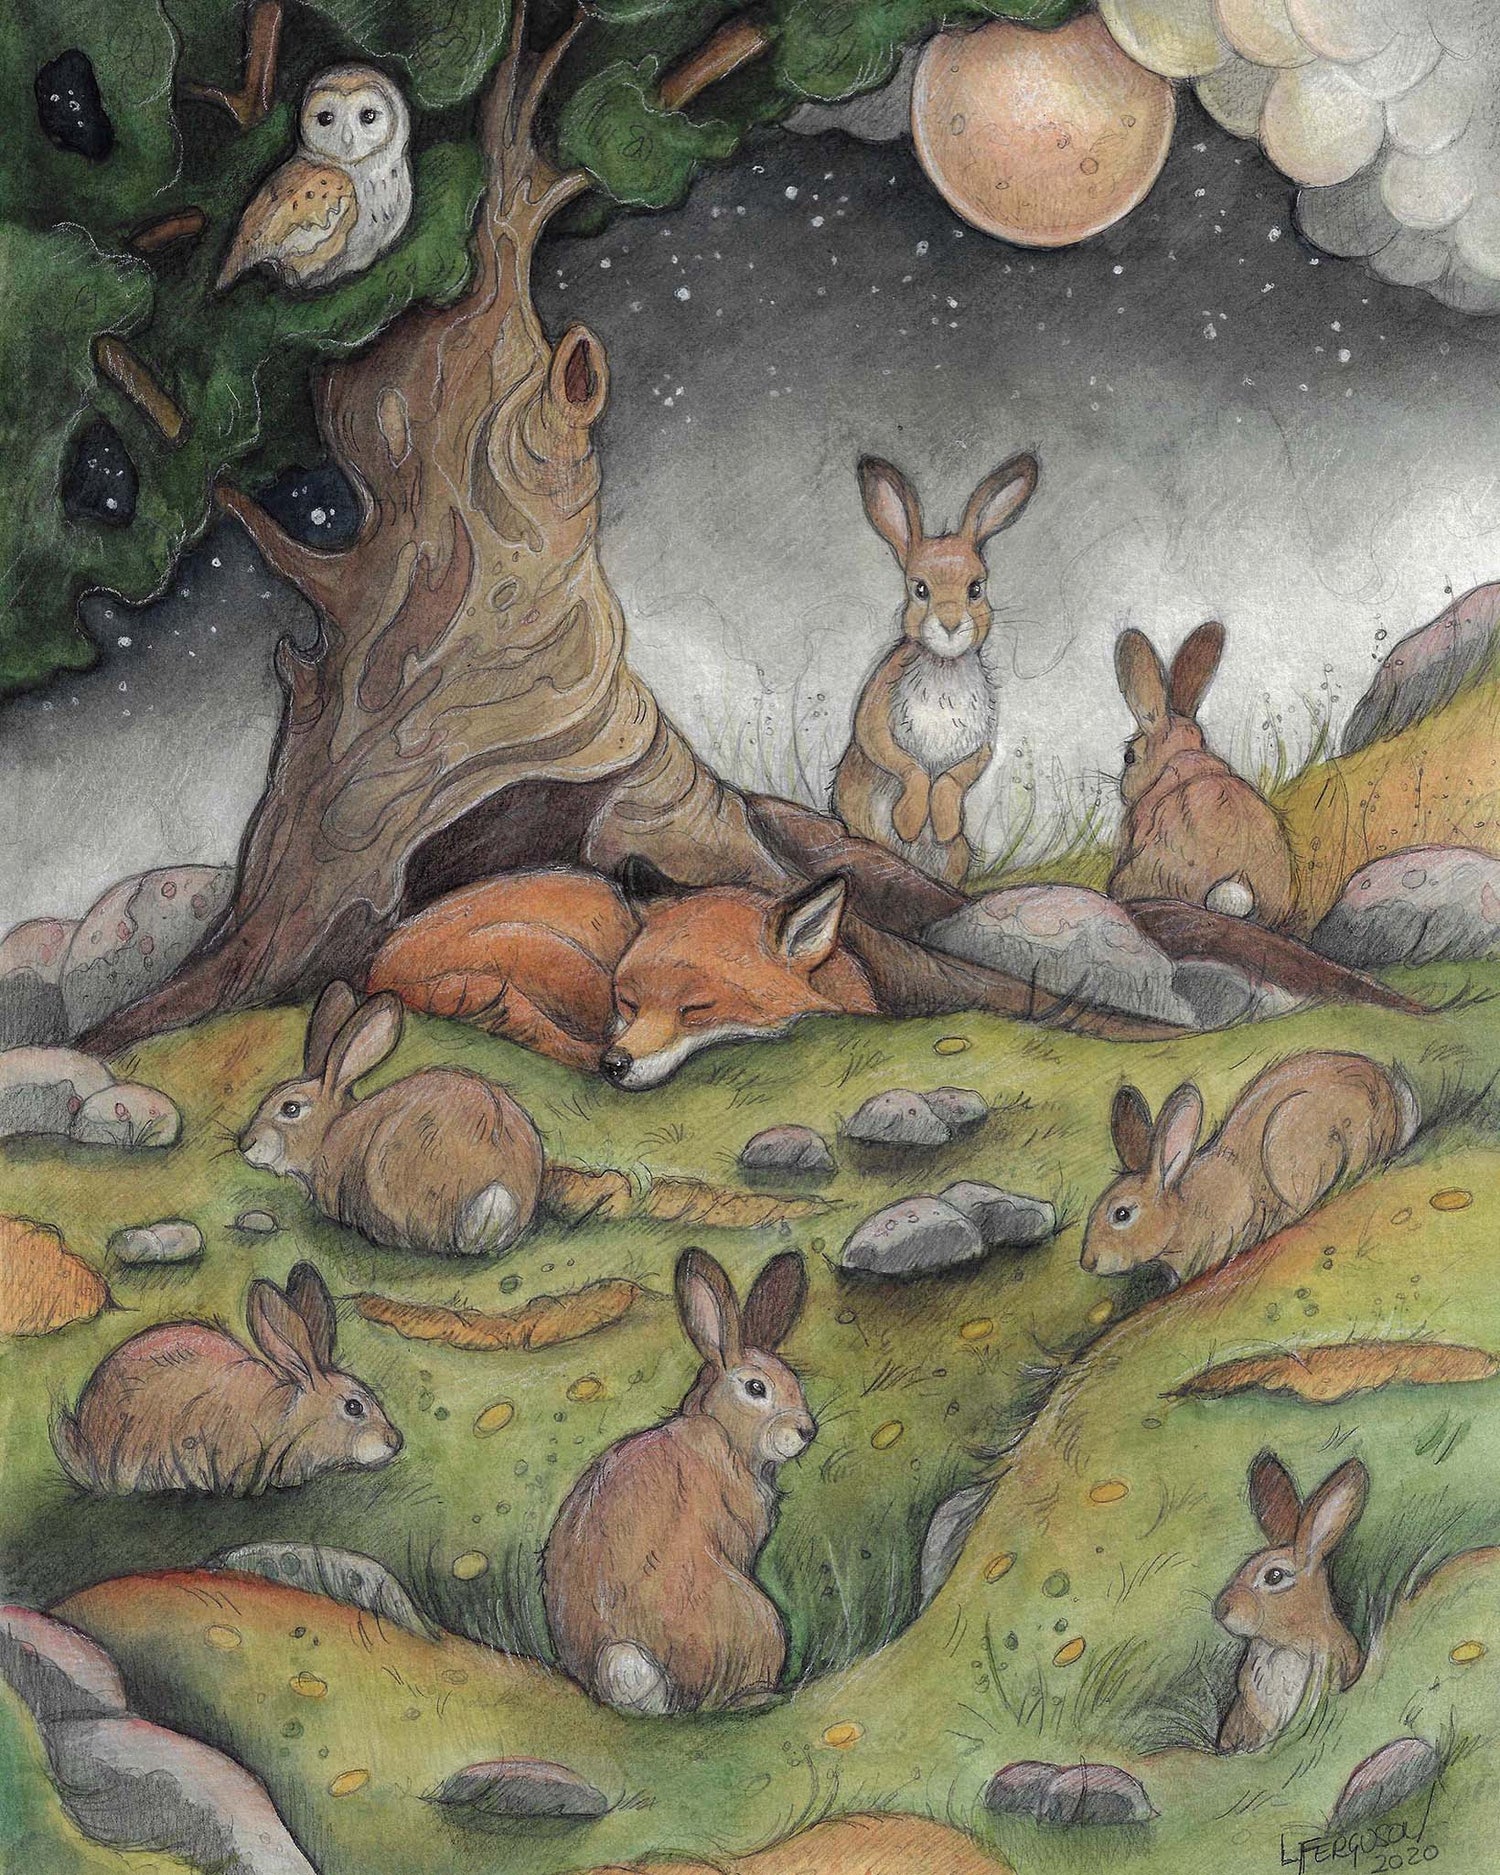 an 8"x10"  art print of a fox sleeping by a tree under a full moon. Many rabbits surround the sleeping fox . A barn owl sits in the tree.